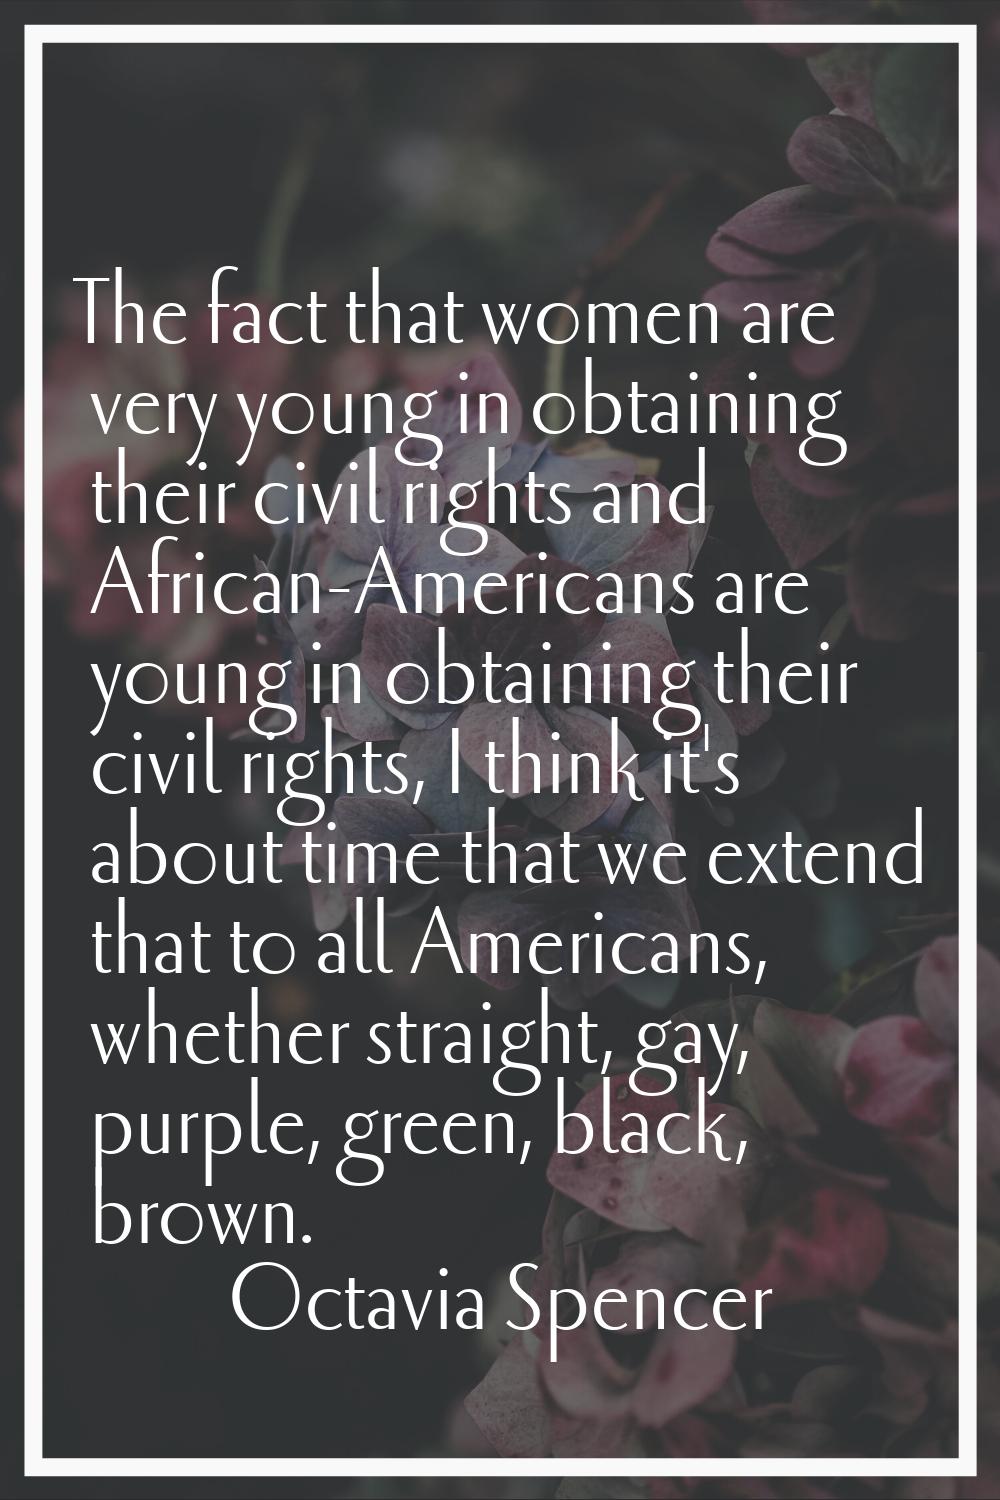 The fact that women are very young in obtaining their civil rights and African-Americans are young 